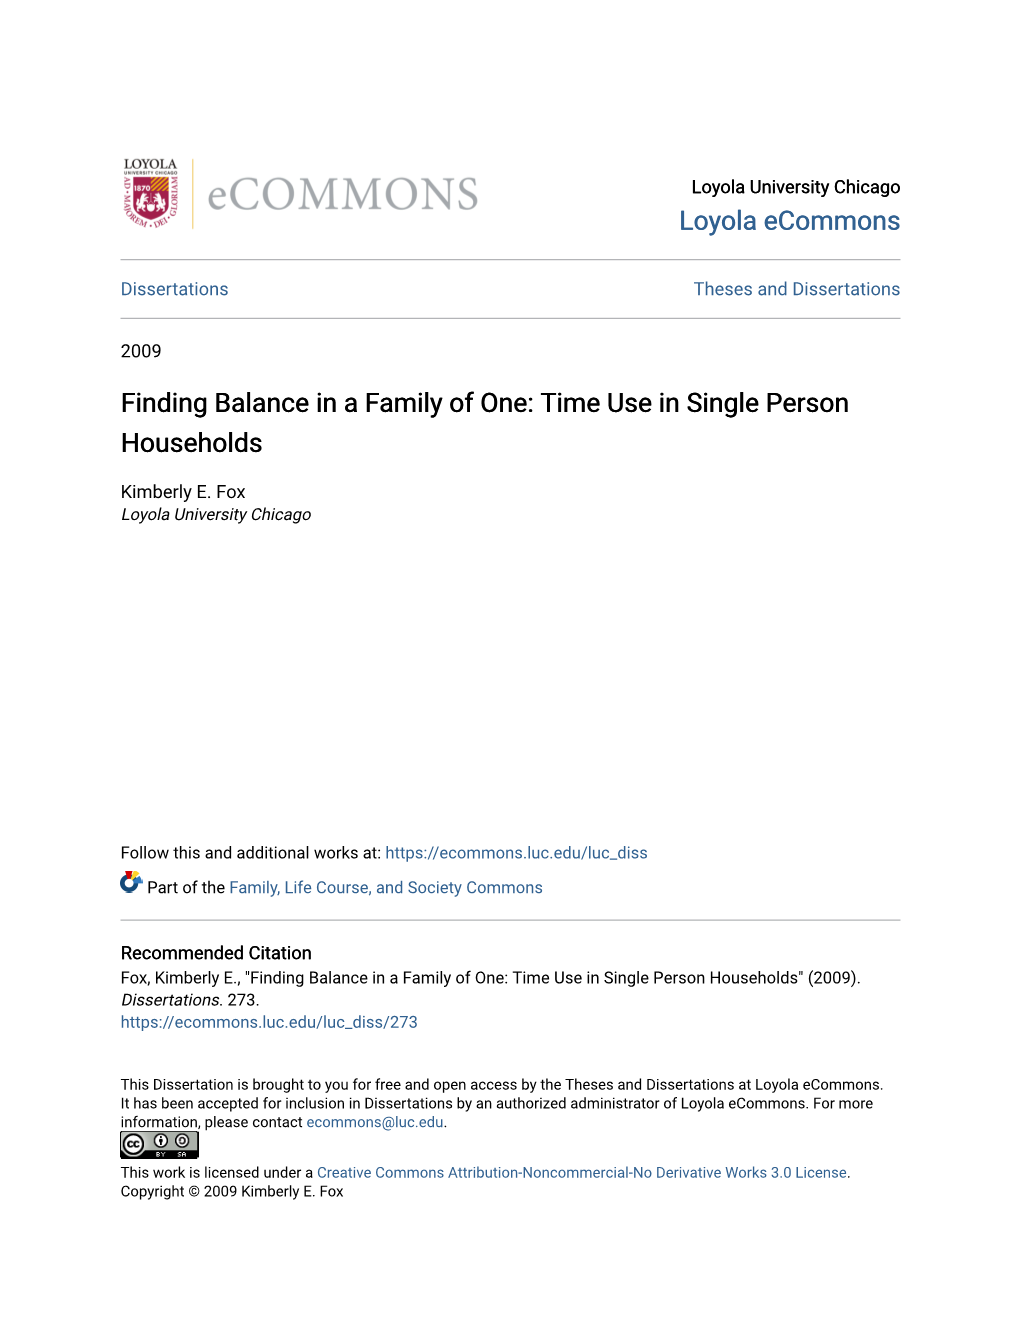 Finding Balance in a Family of One: Time Use in Single Person Households